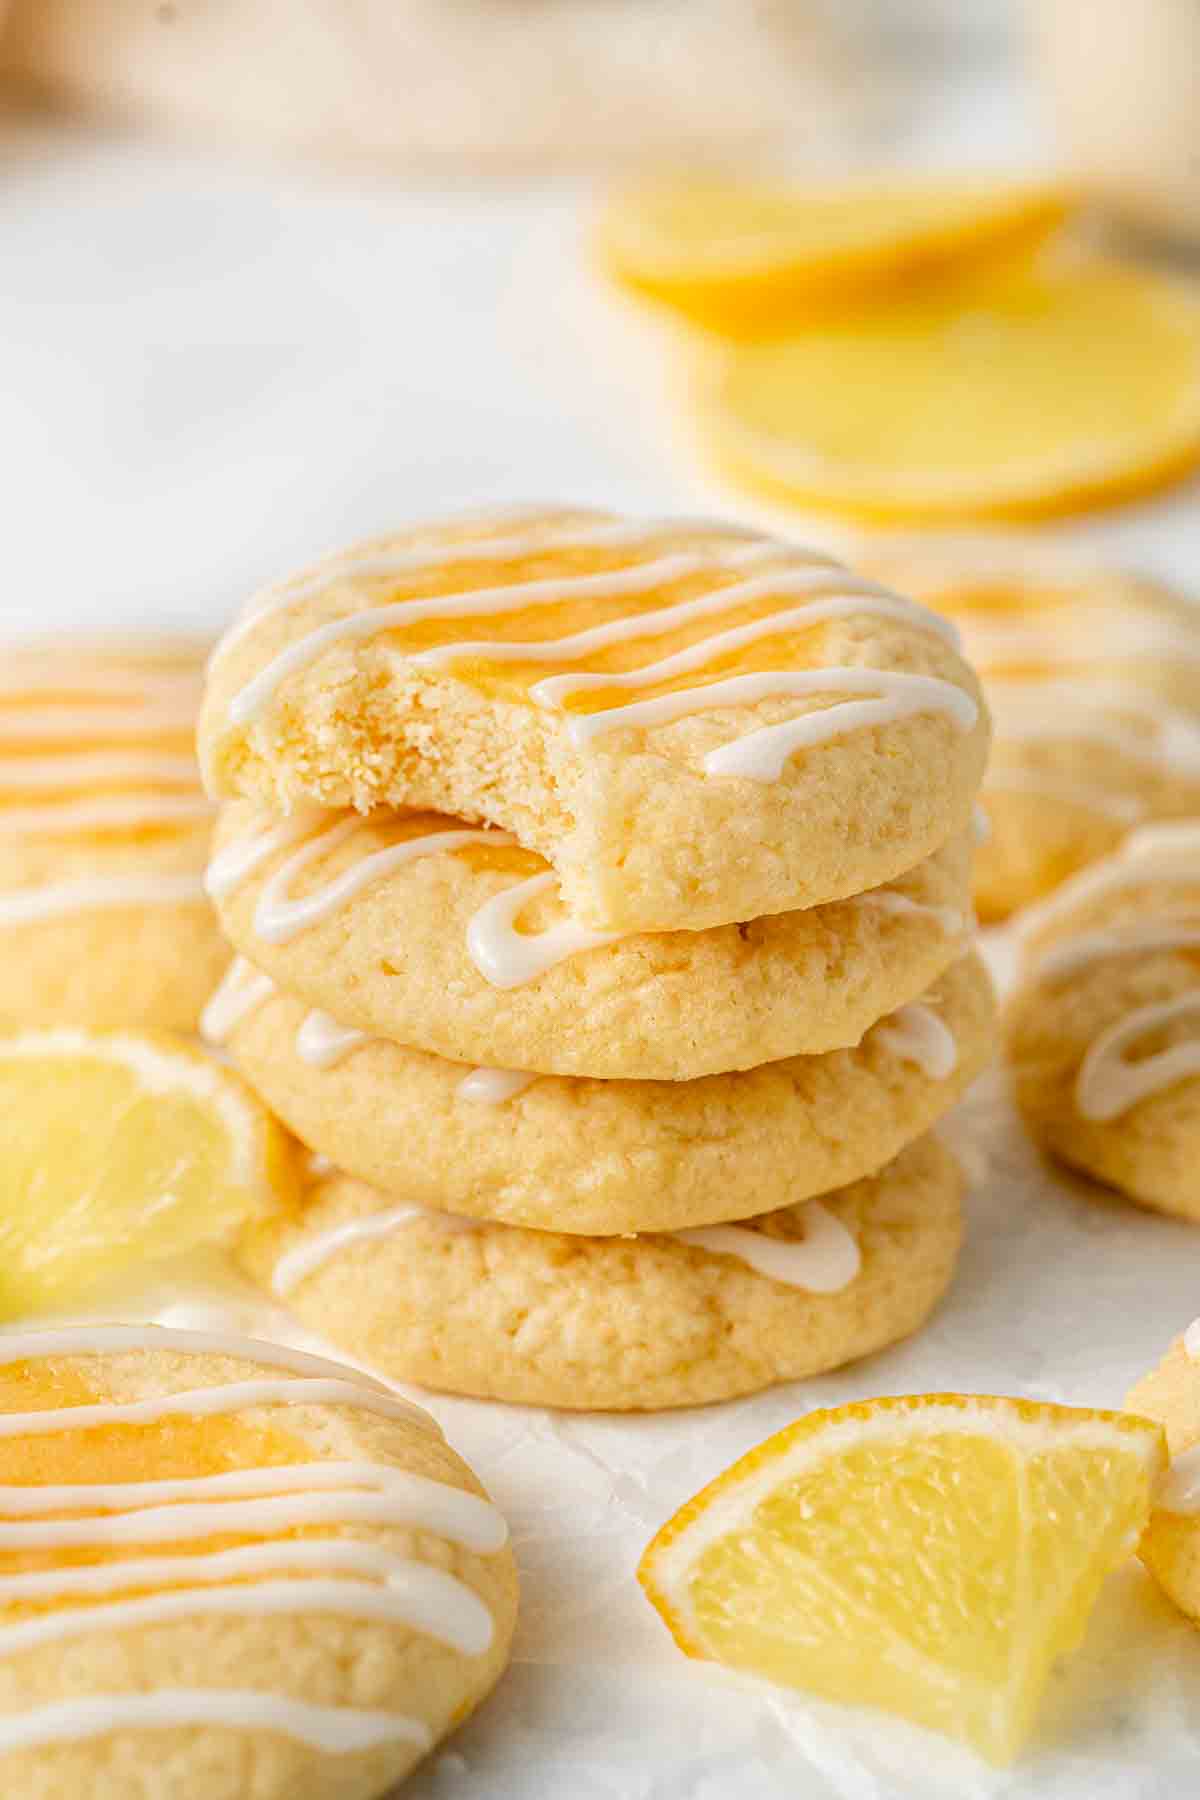 Stack of 4 lemon thumbprint cookies, one with a bite taken.